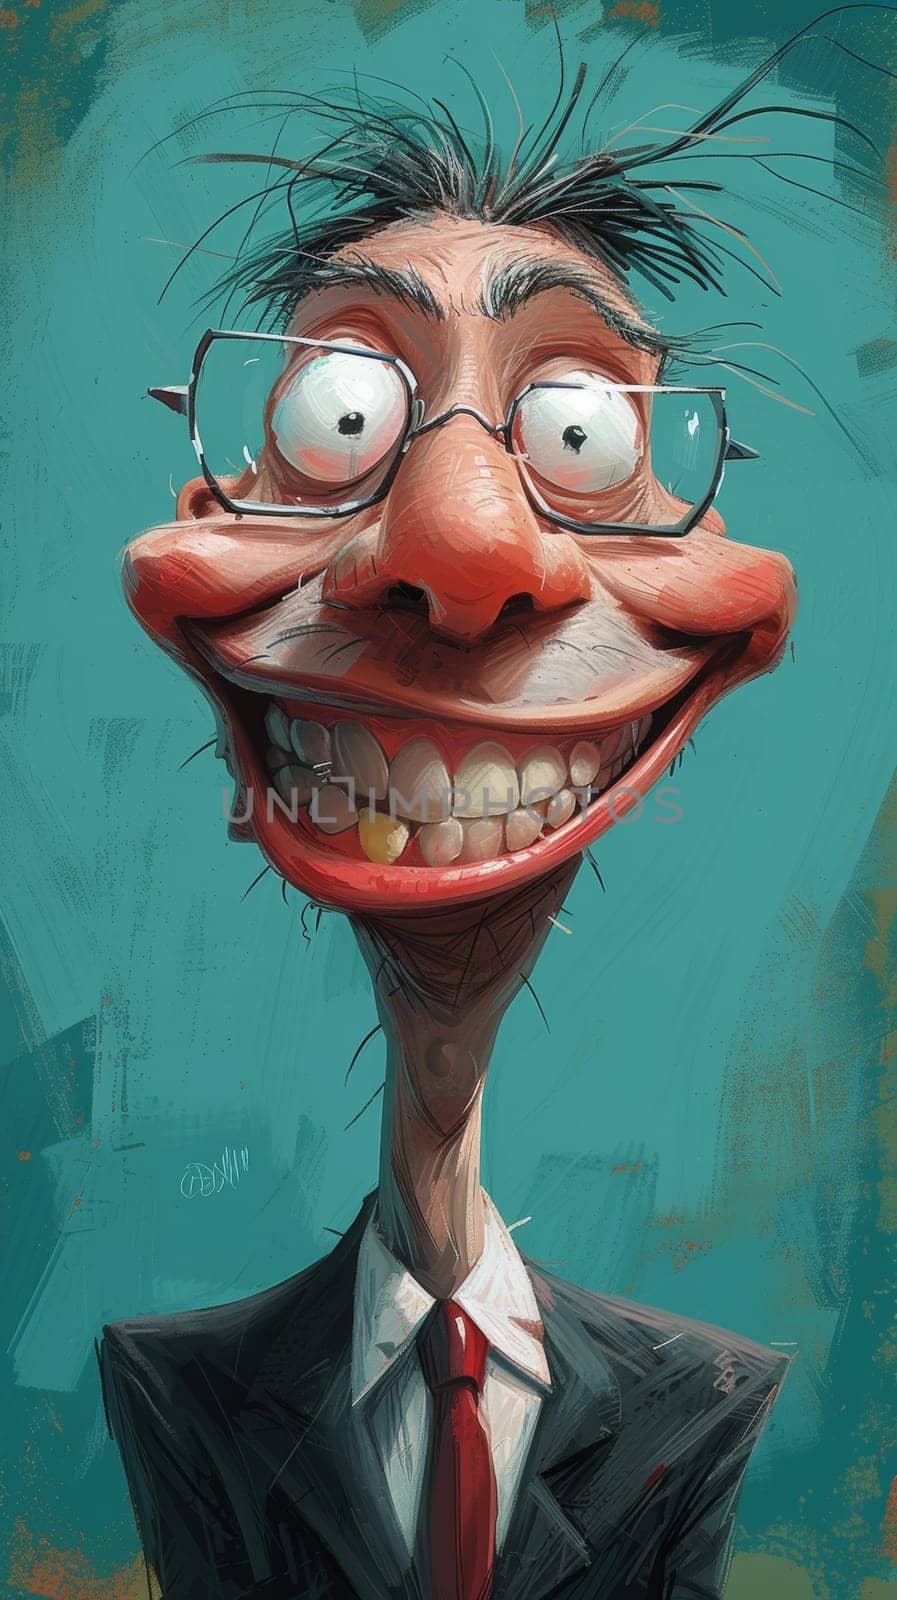 A cartoon character with a big nose and glasses